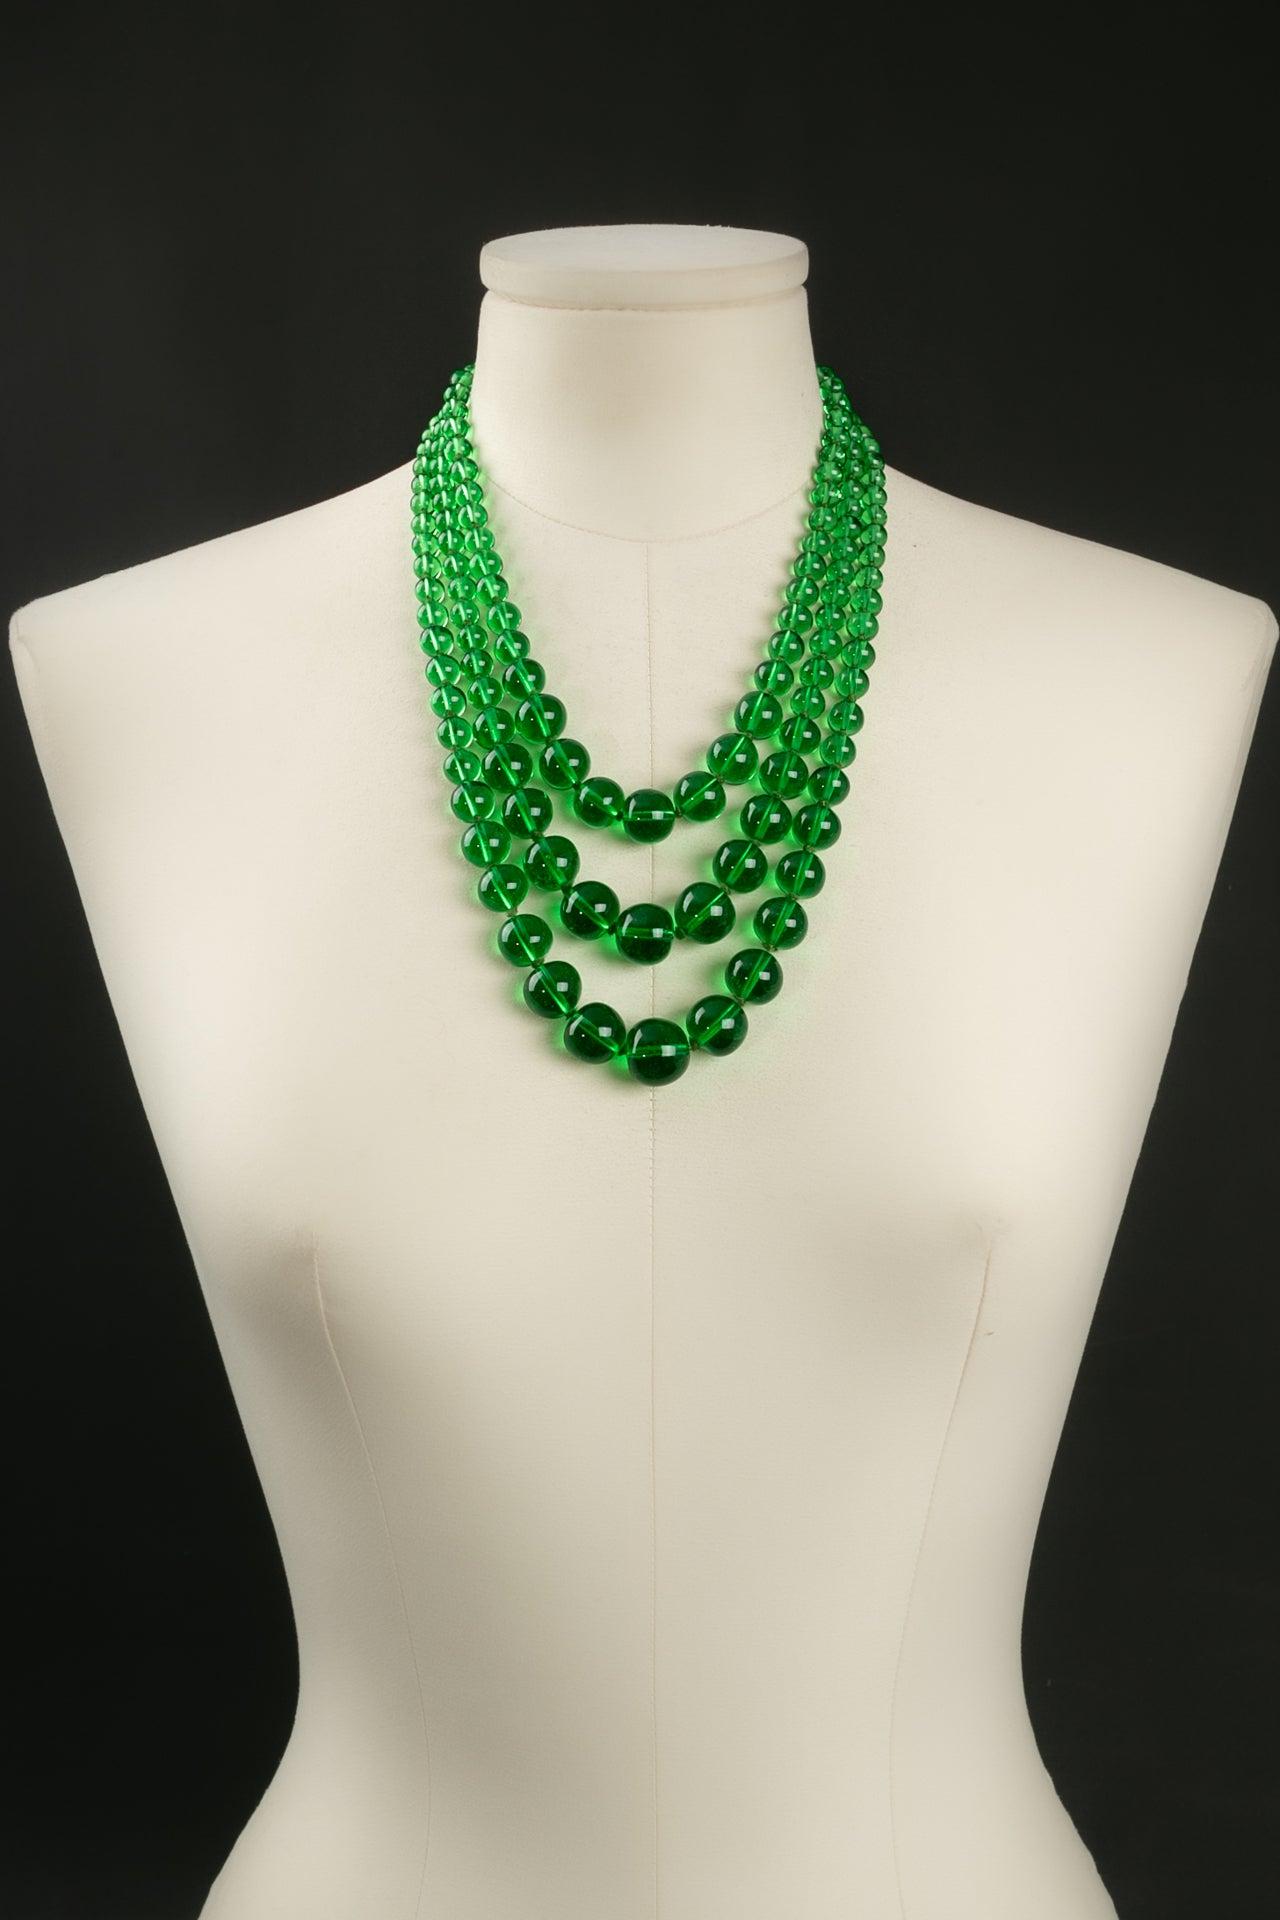 Three strings necklace composed of green glass beads with a plated silver clasp embellished with a re rhinestone.

Additional information:
Condition: Very good condition
Dimensions: Length: 47 cm (18.5